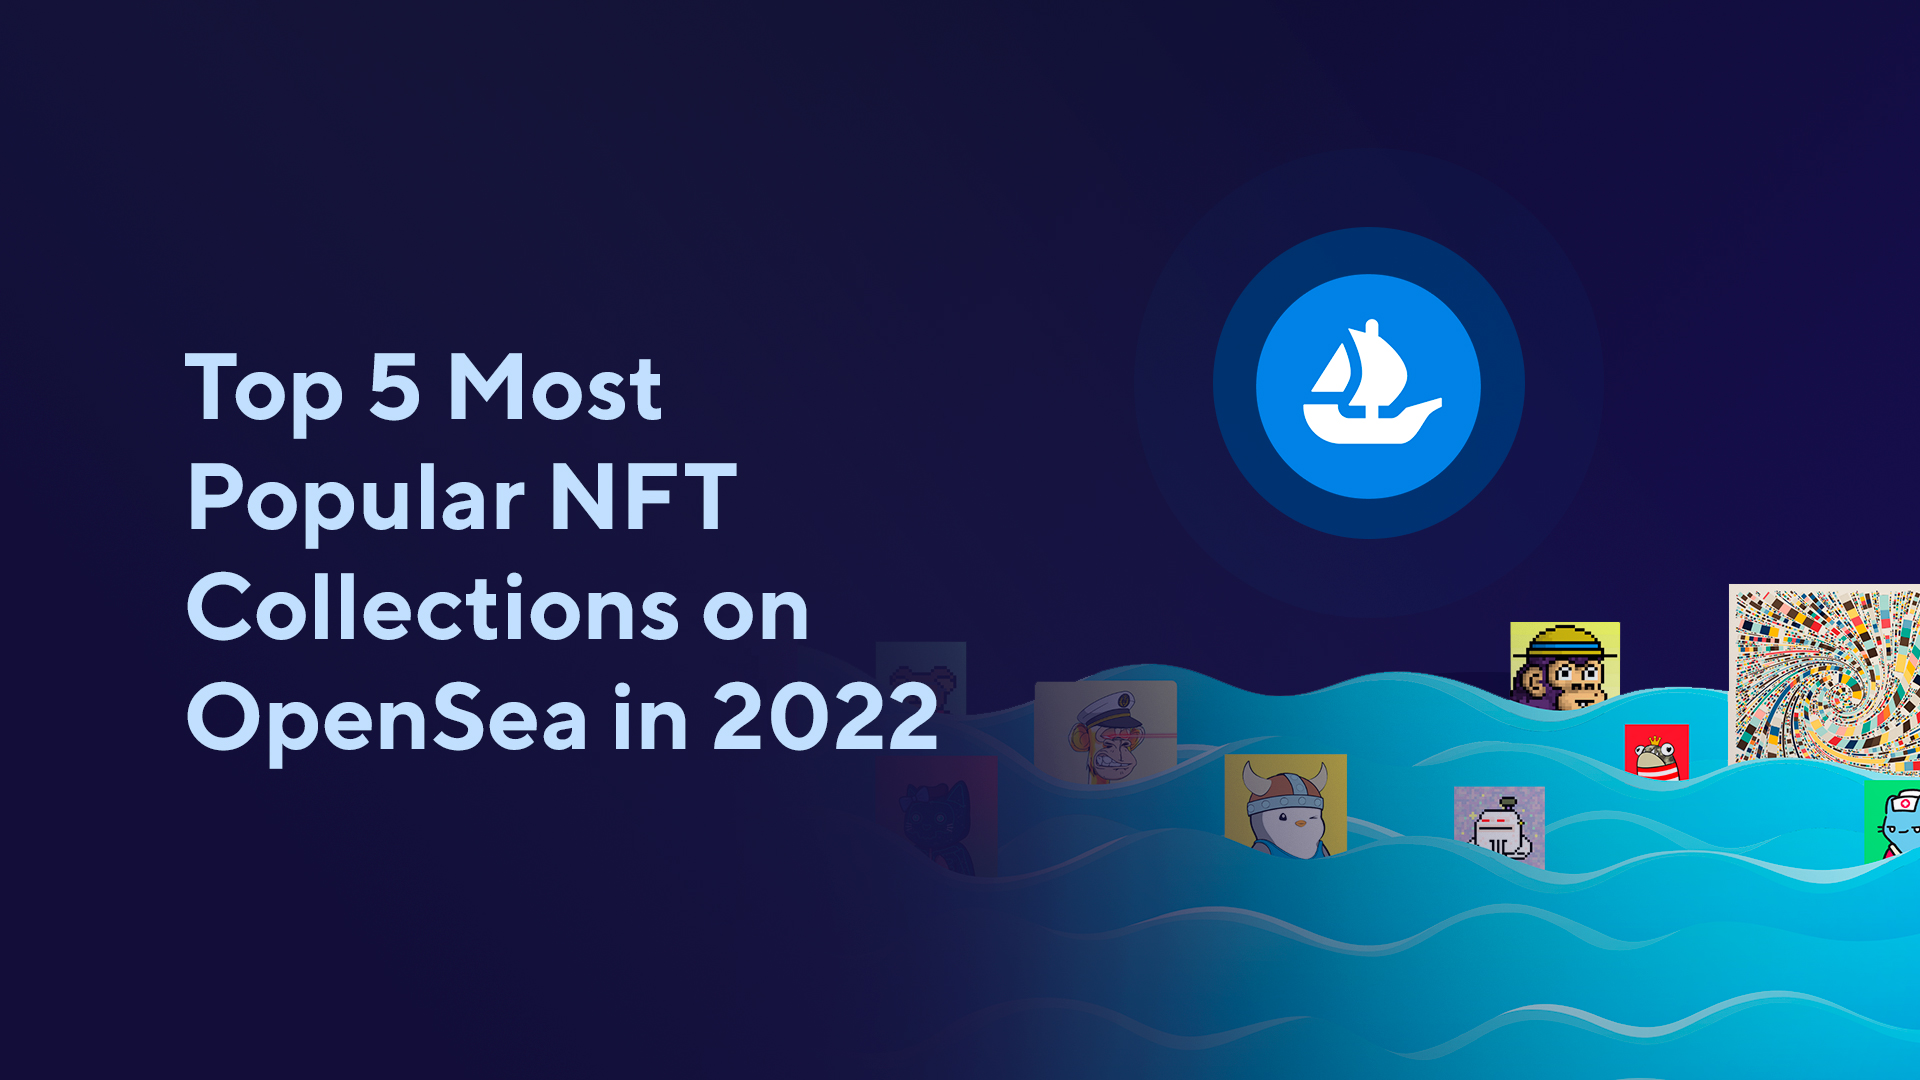 Top 5 Most Popular NFT Collections on OpenSea in 2022